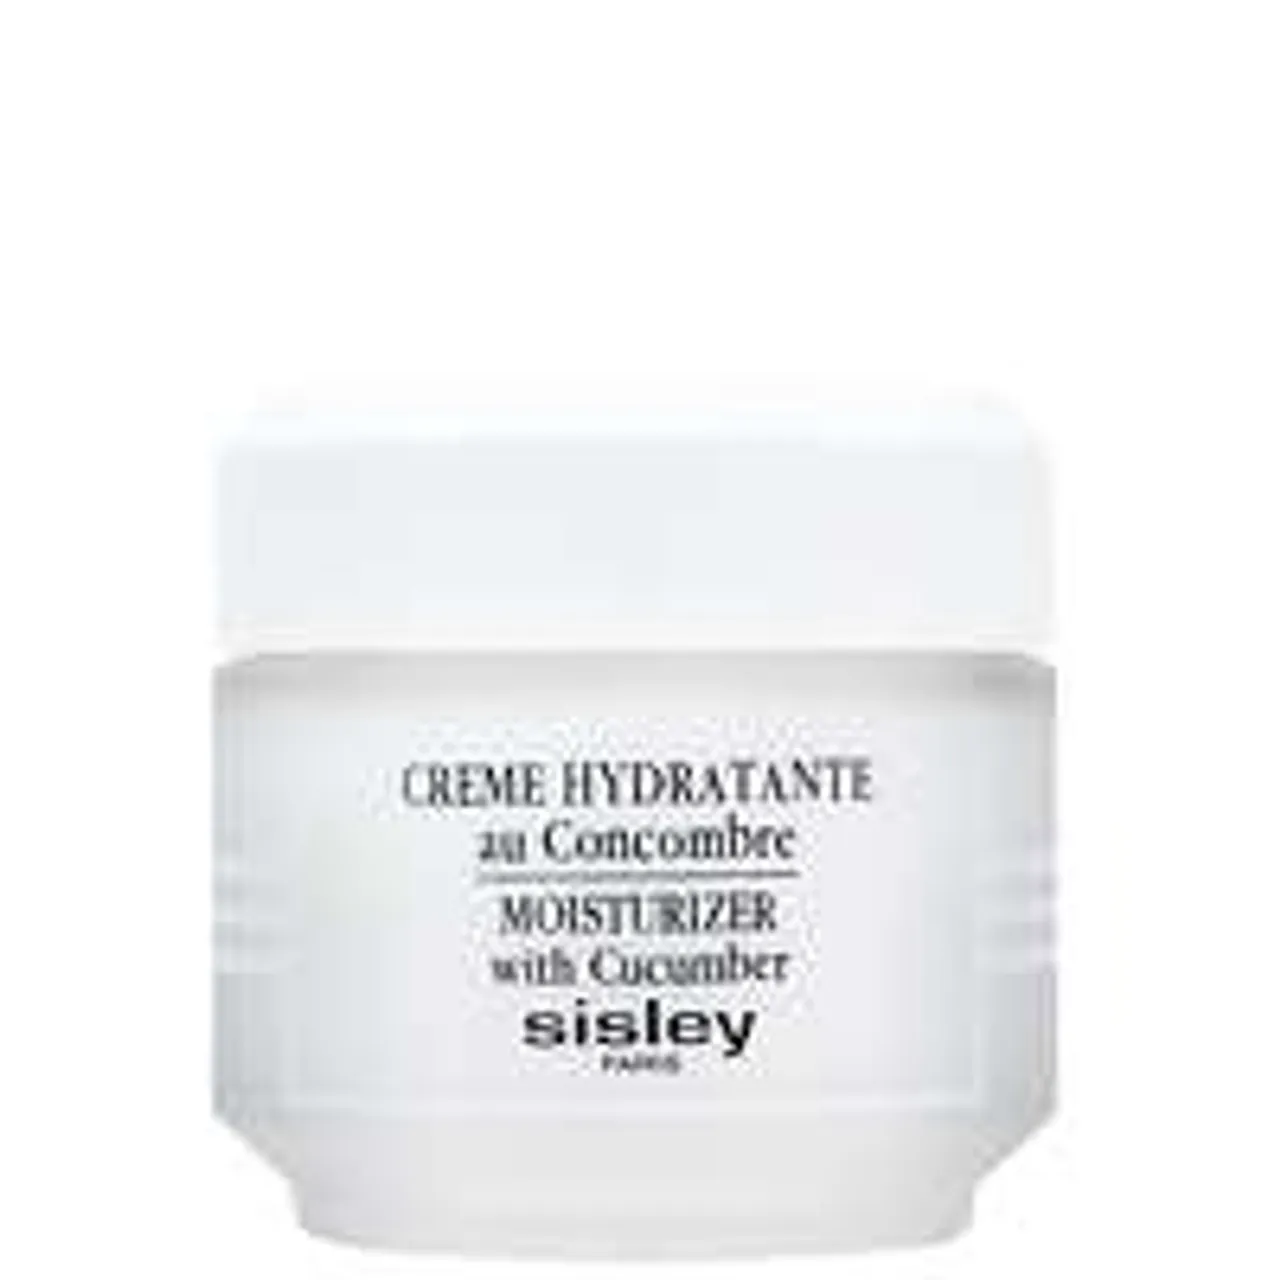 Sisley Day Care Moisturizer with Cucumber For All Skin Types 50ml